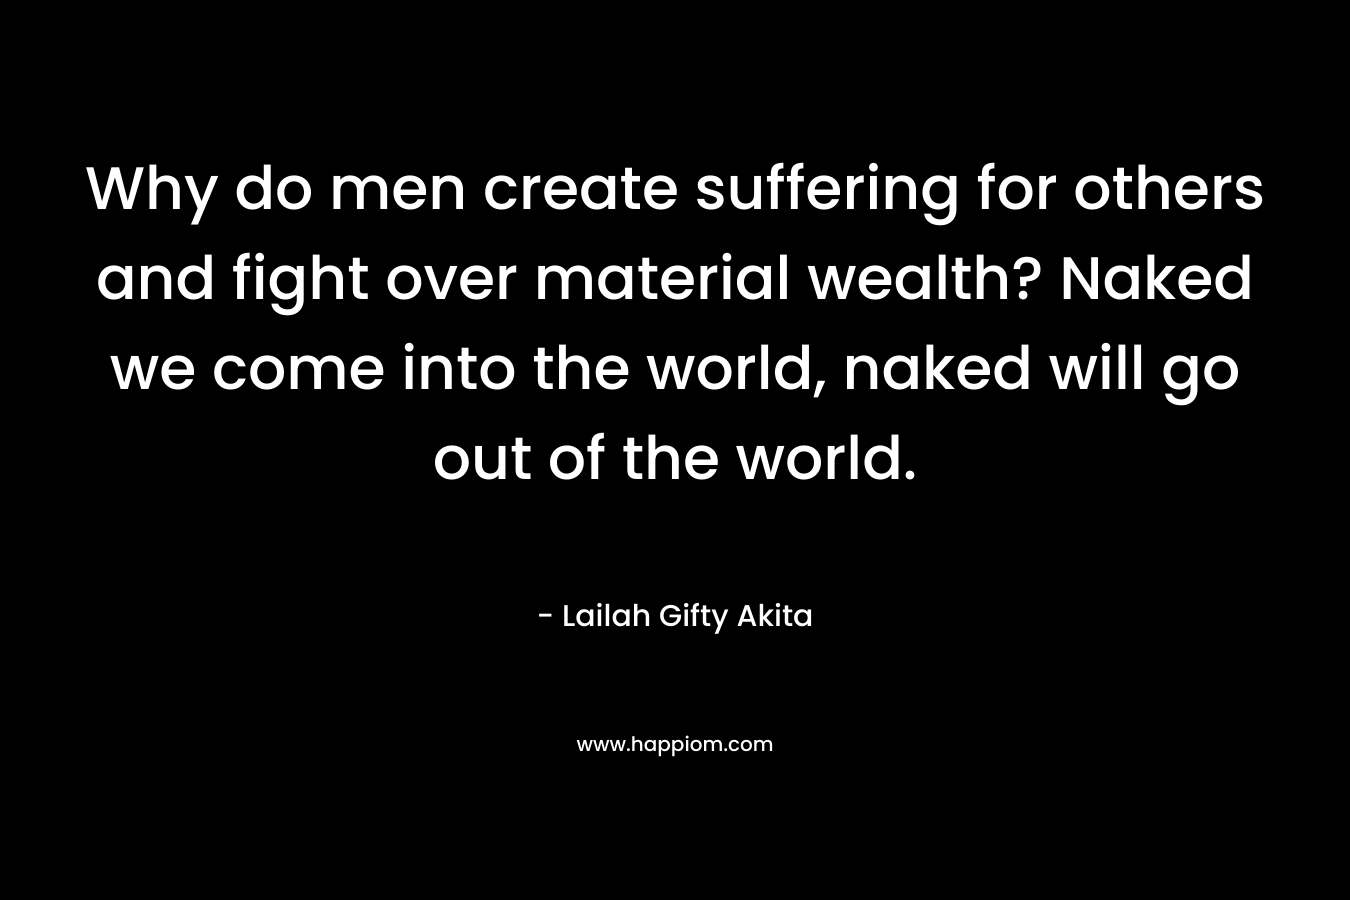 Why do men create suffering for others and fight over material wealth? Naked we come into the world, naked will go out of the world.